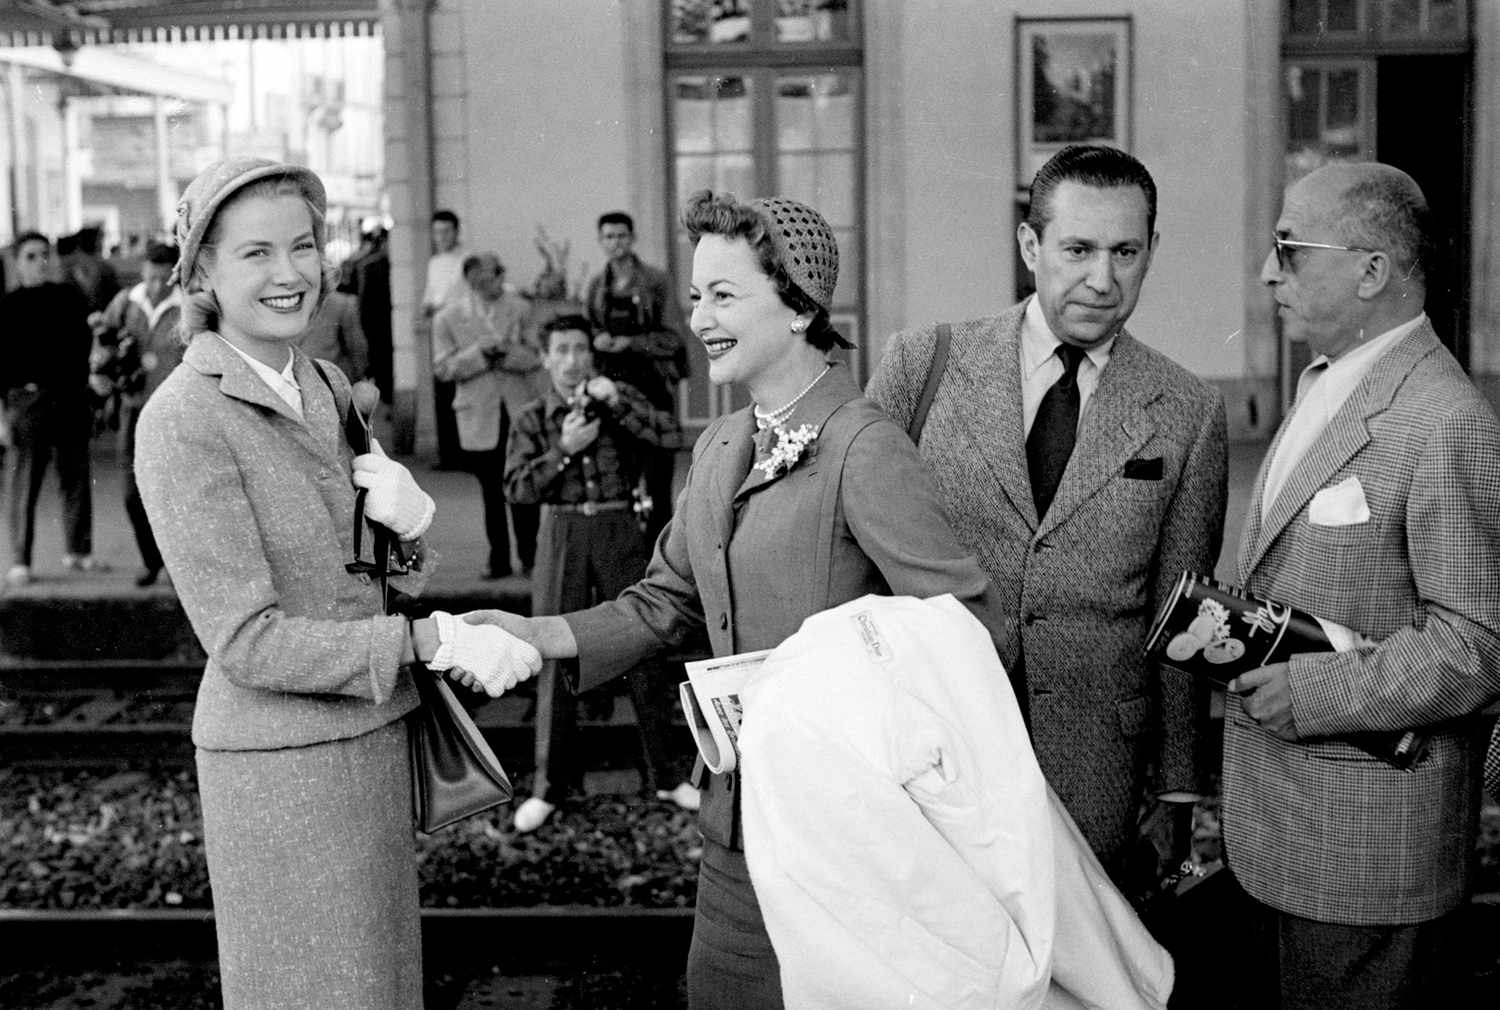 Olivia de Havilland and Grace Kelly, on right Pierre Galante. Arrival at Cannes station 1955 the first meeting of Princess Grace and Prince Rainier, please tool the attached photo. Caption info: Olivia de Havilland and Grace Kelly, on right Pierre Galante. Arrival at Cannes station 1955 (Pierre Galante is the man with the black tie. The other man's id is not known). Credit must read : "Photo Edward Quinn, &copy; edwardquinn.com&rdquo;